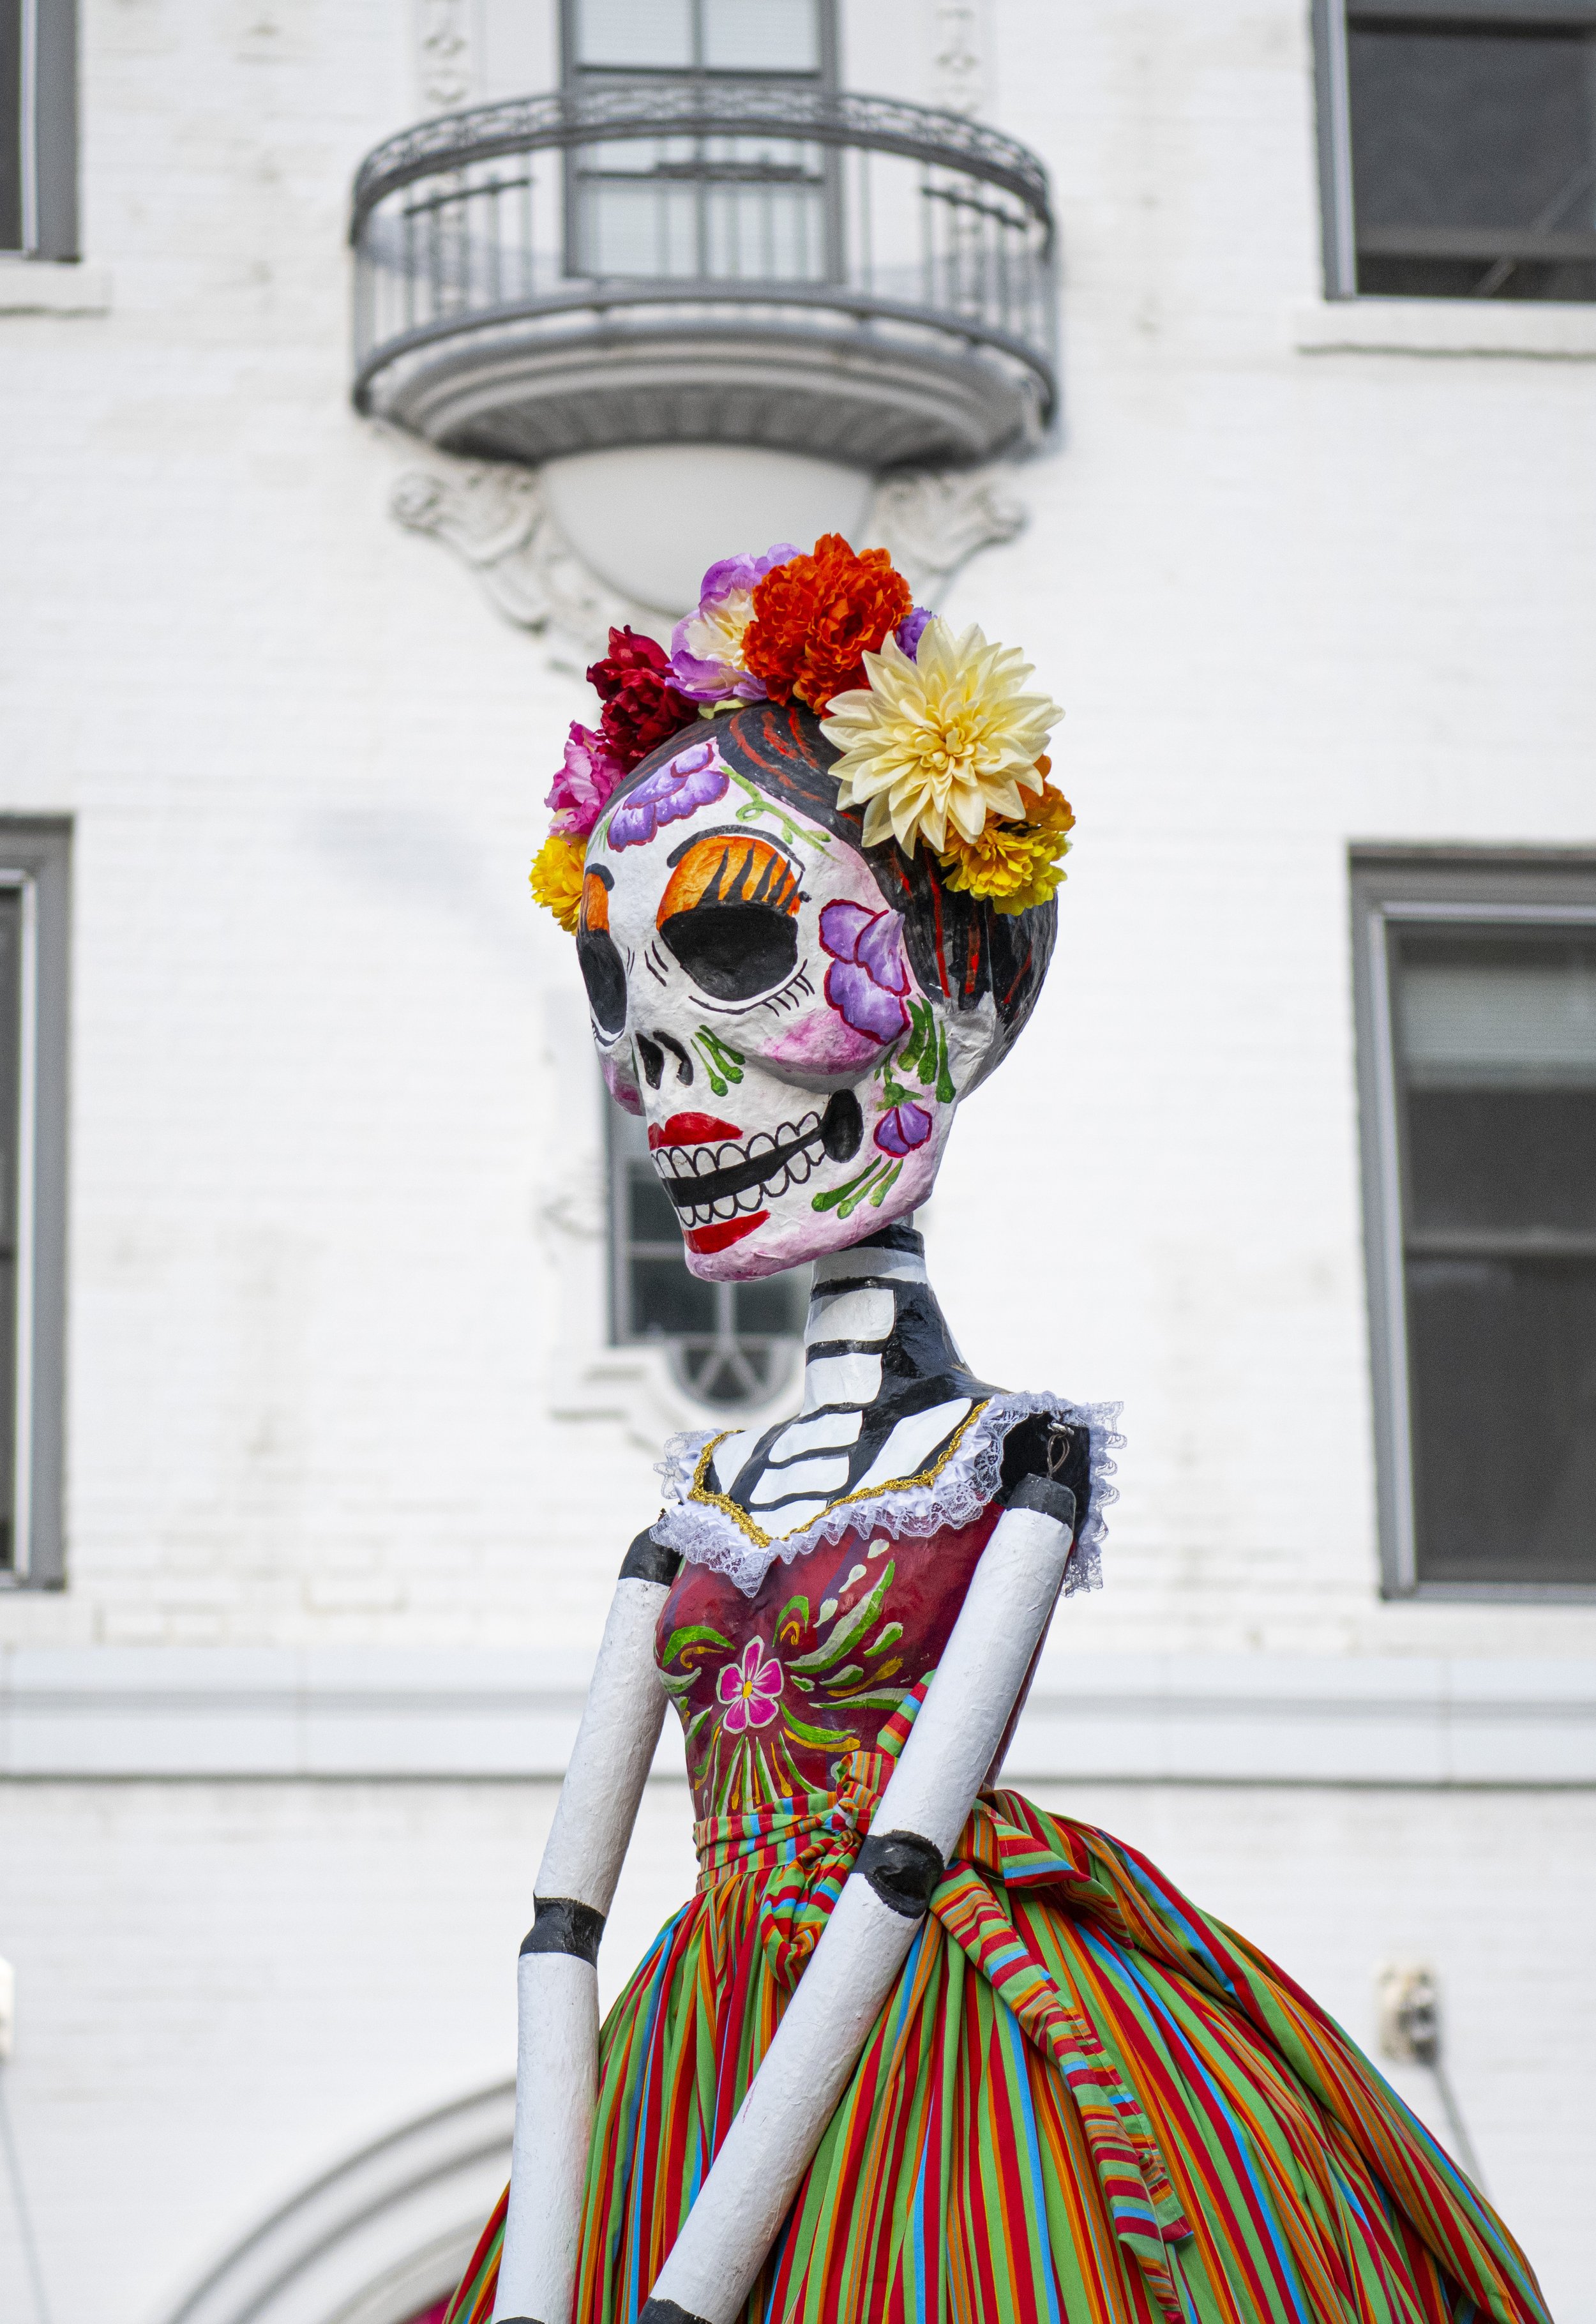  The Third Street Promenade celebrates Dia delos Muertos (Day of the Dead) with a celebration planned at the main stage beginning at 5:30 October 30, 2021. (Jon Putman | The Corsair) 